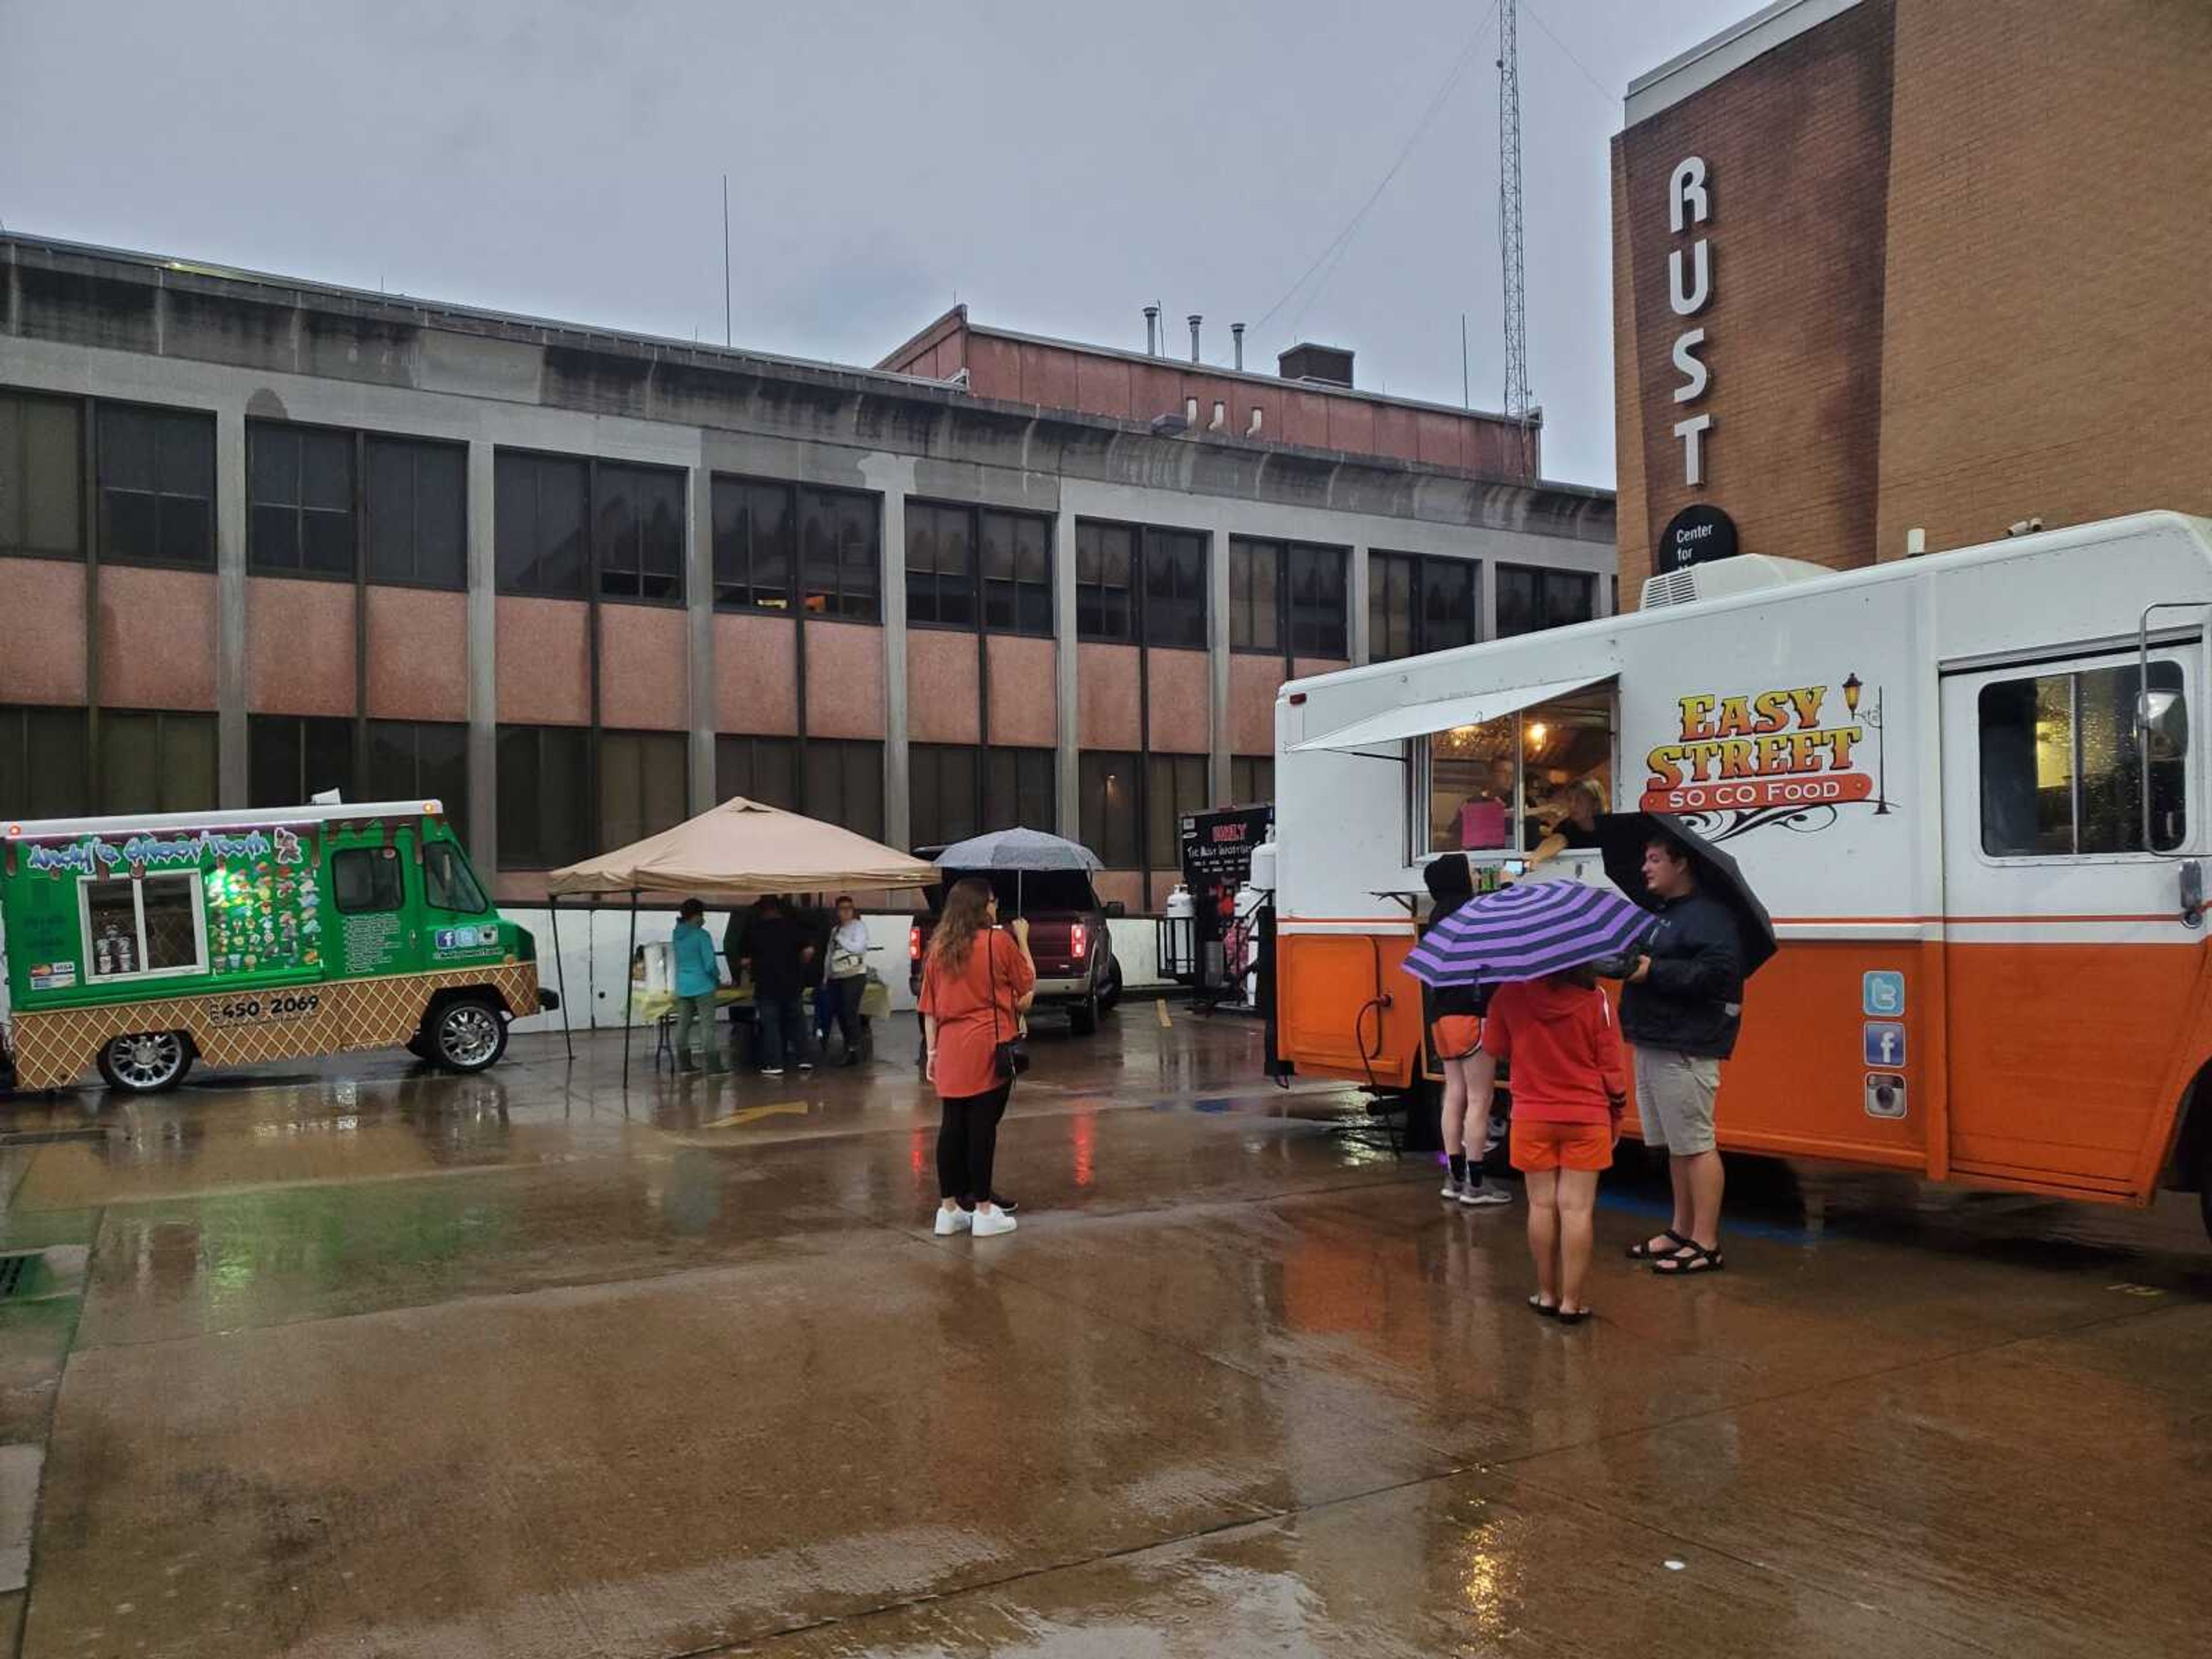 Food Truck Friday refuses to be rained out